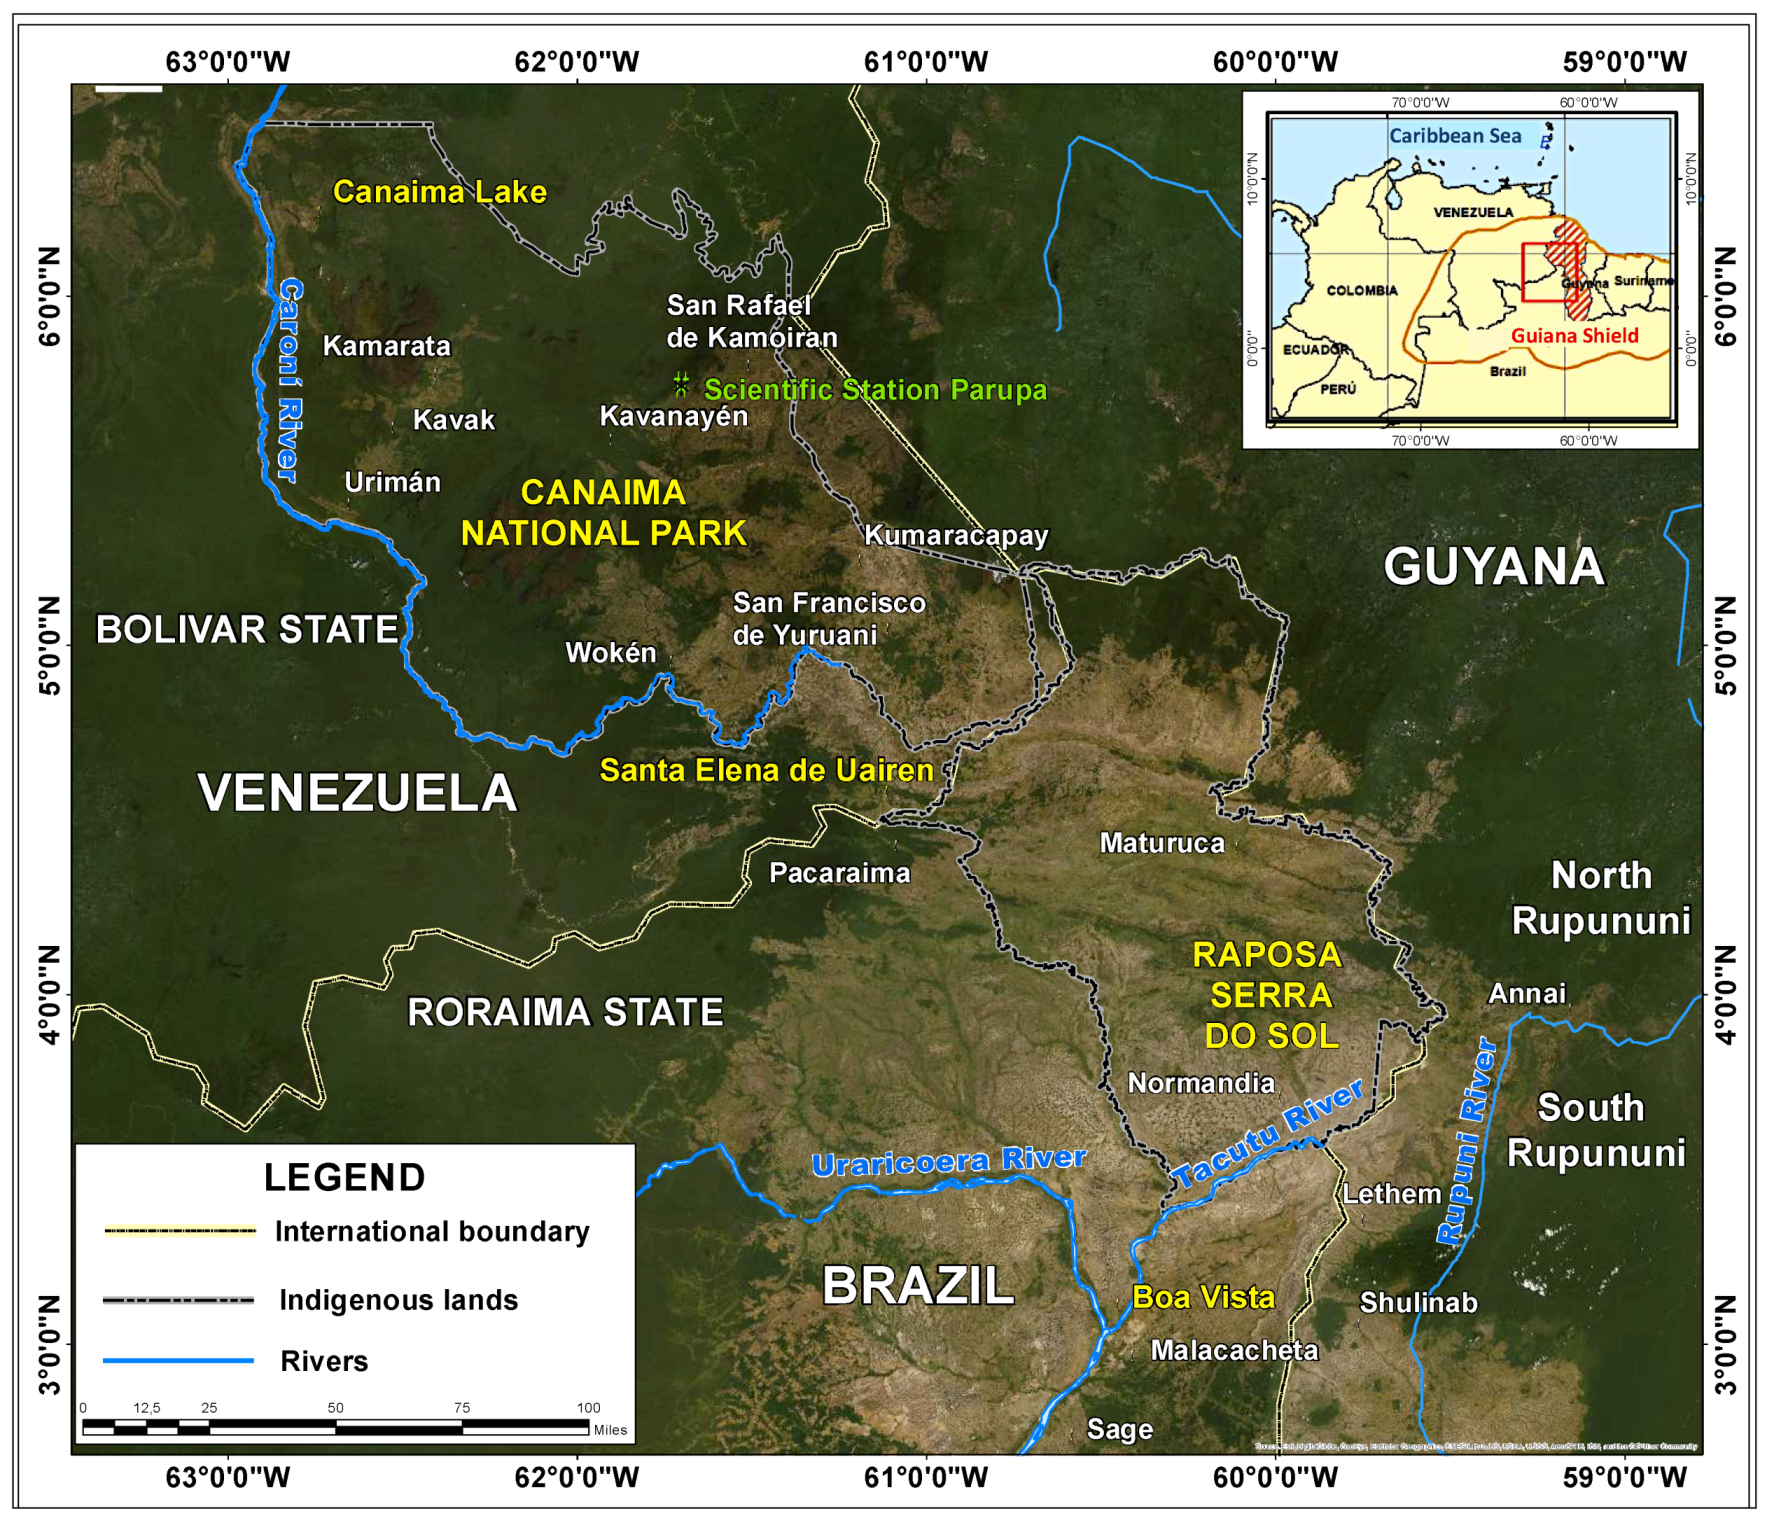 Fire | Free Full-Text | Sharing Multiple Perspectives on Burning: Towards a  Participatory and Intercultural Fire Management Policy in Venezuela,  Brazil, and Guyana